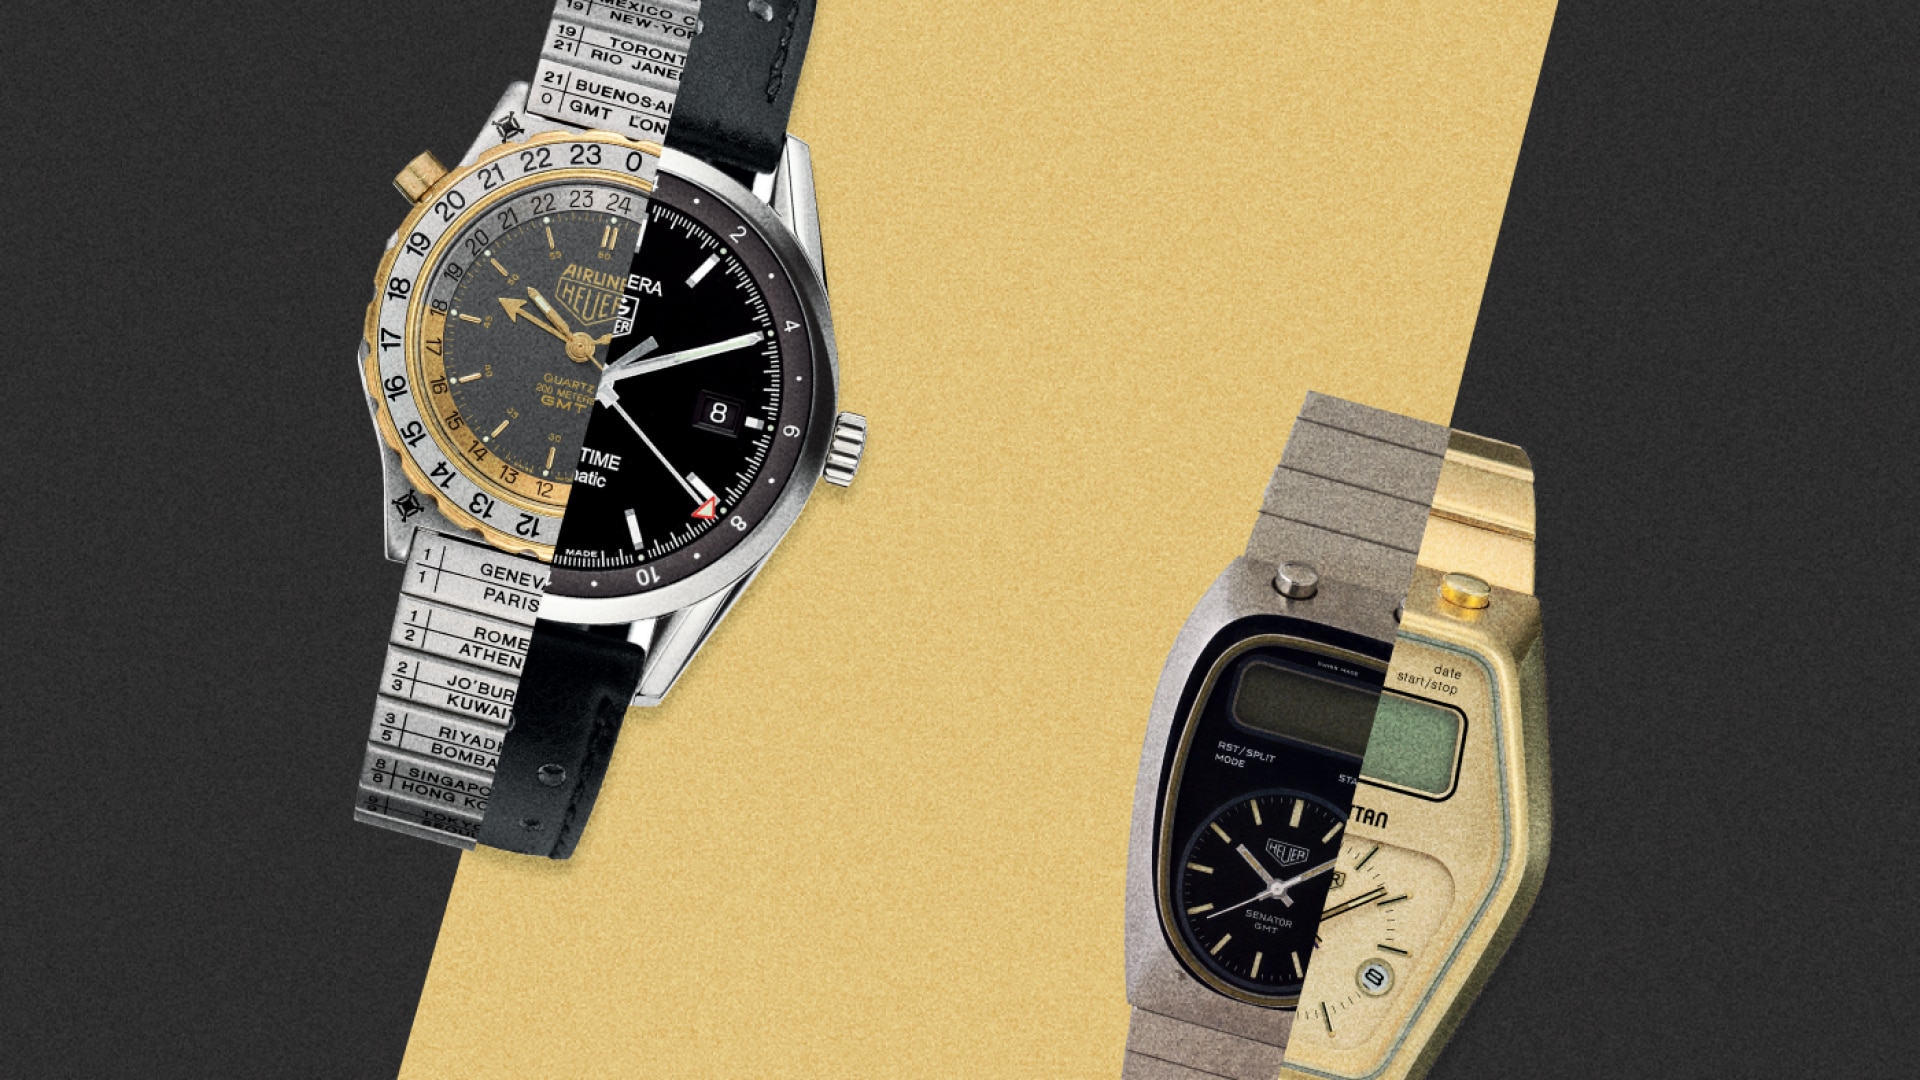 COVID-19 was TAG Heuer's time to shine online